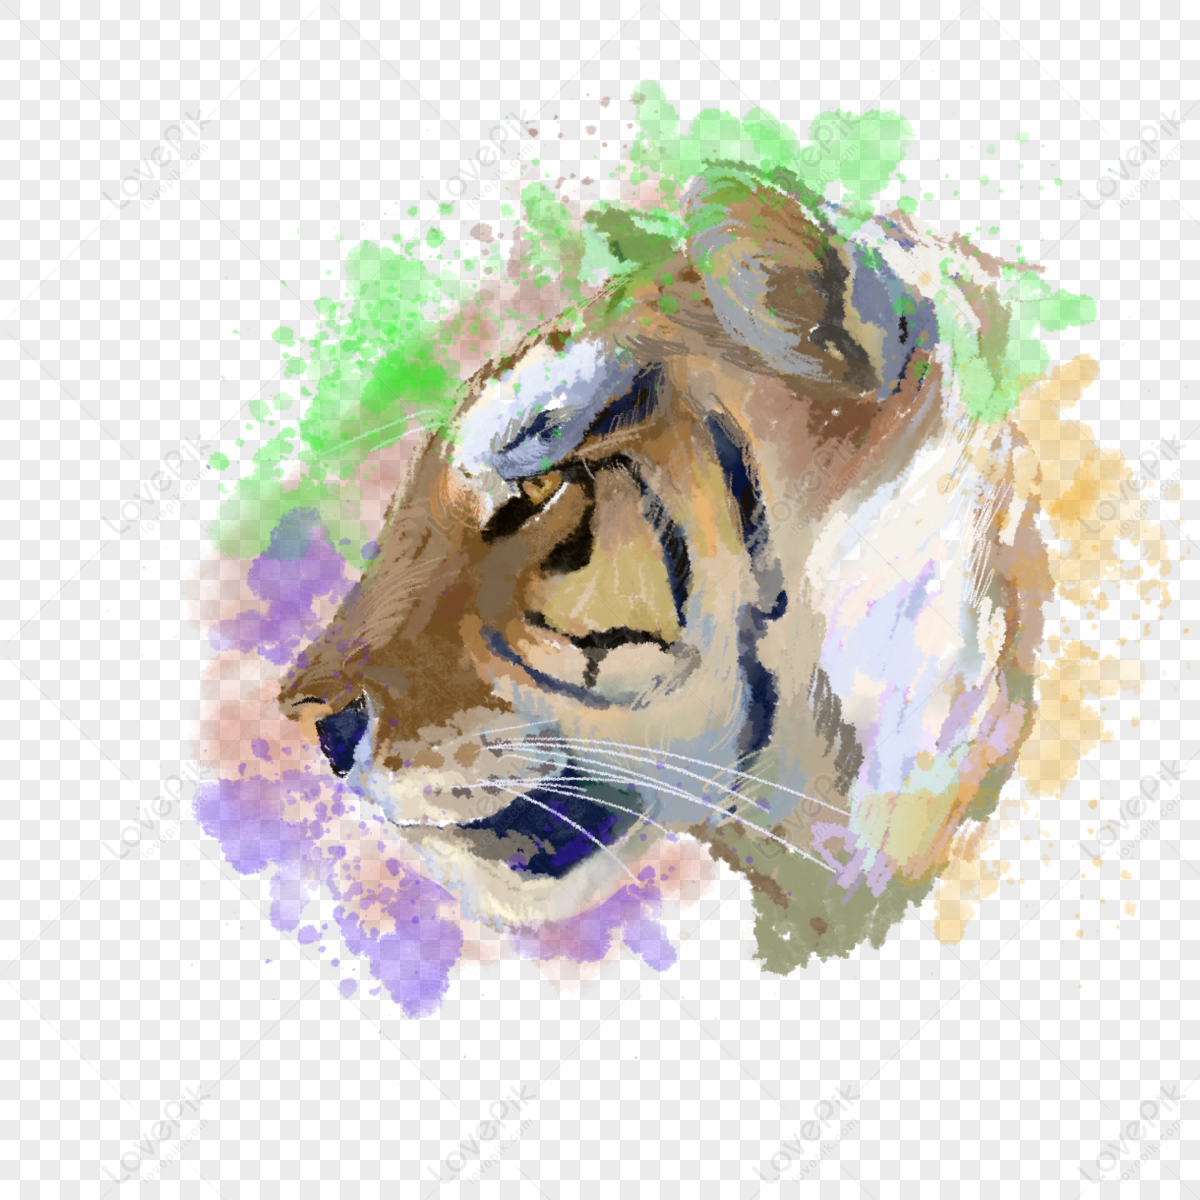 Watercolor vacuctous animal mighty tiger avatar,bloom,watercolor animals png white transparent